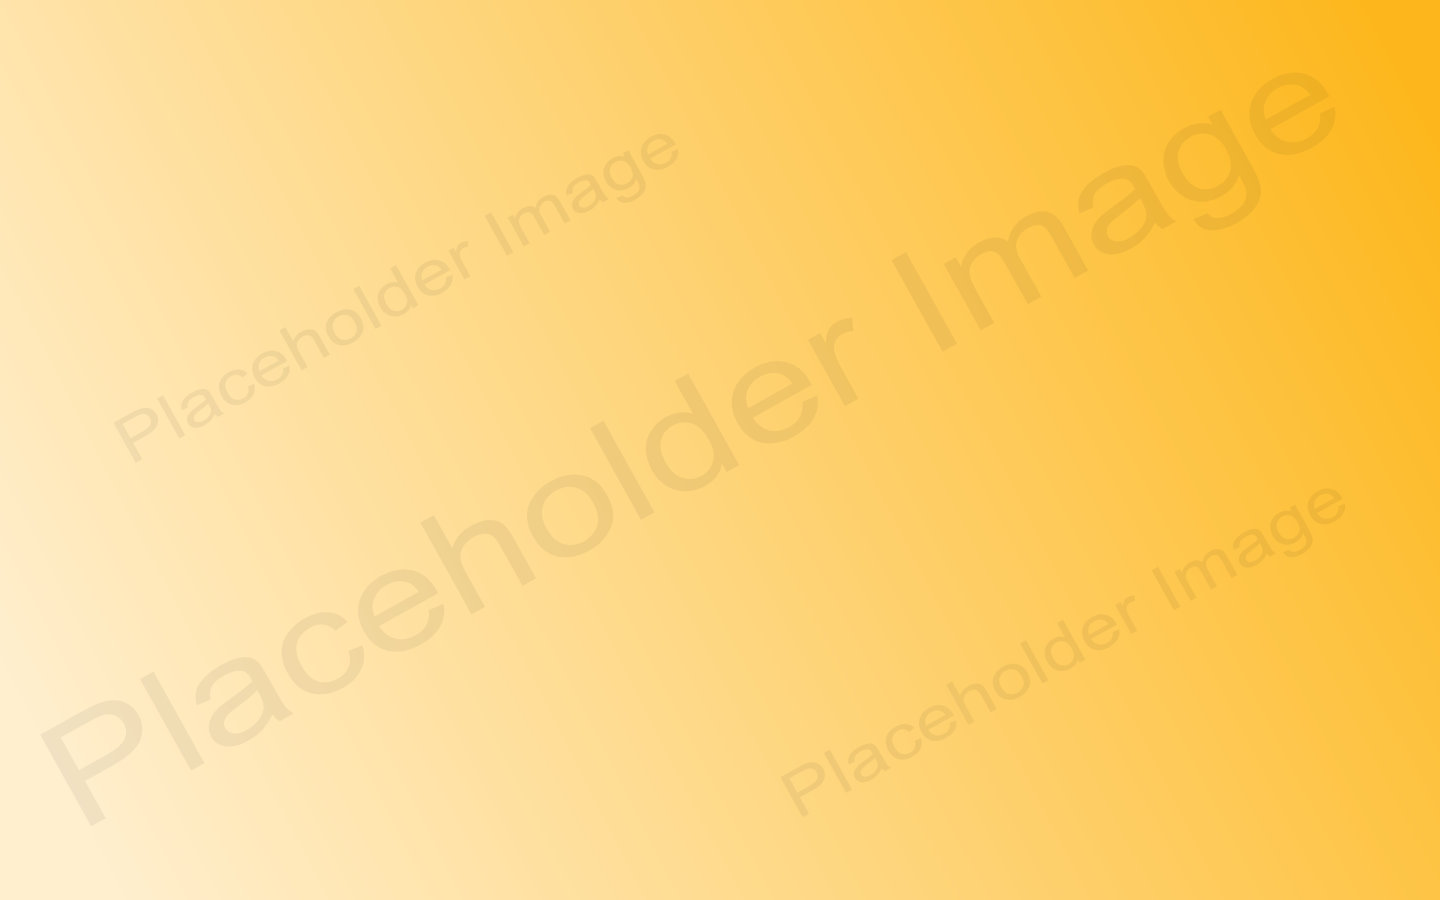 A golden graphic with the text Placeholder Image written on it diagonally